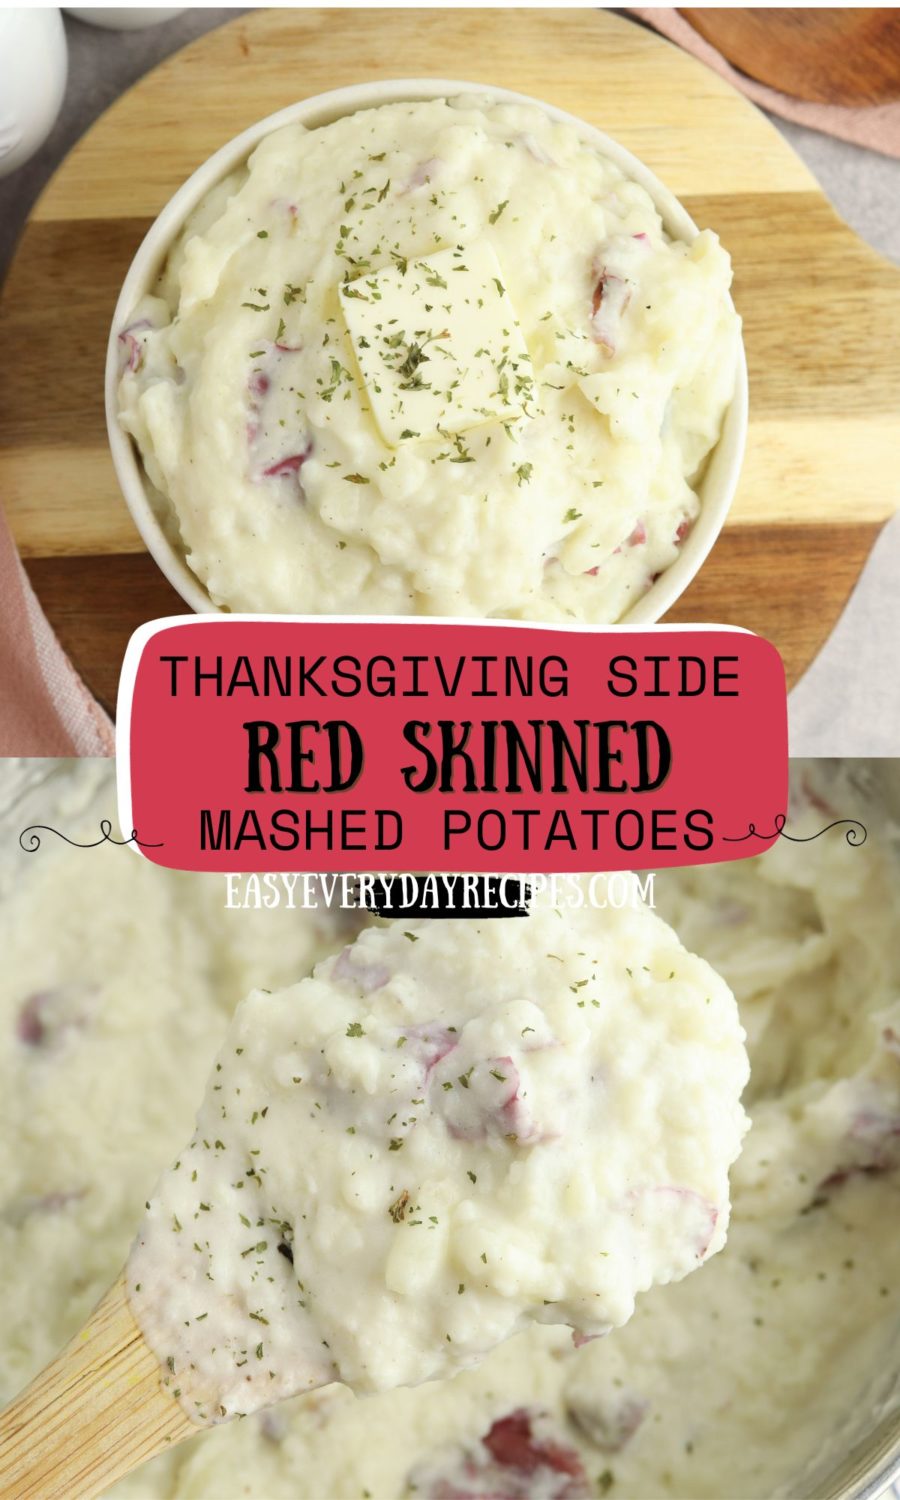 Thanksgiving side red skinned mashed potatoes.